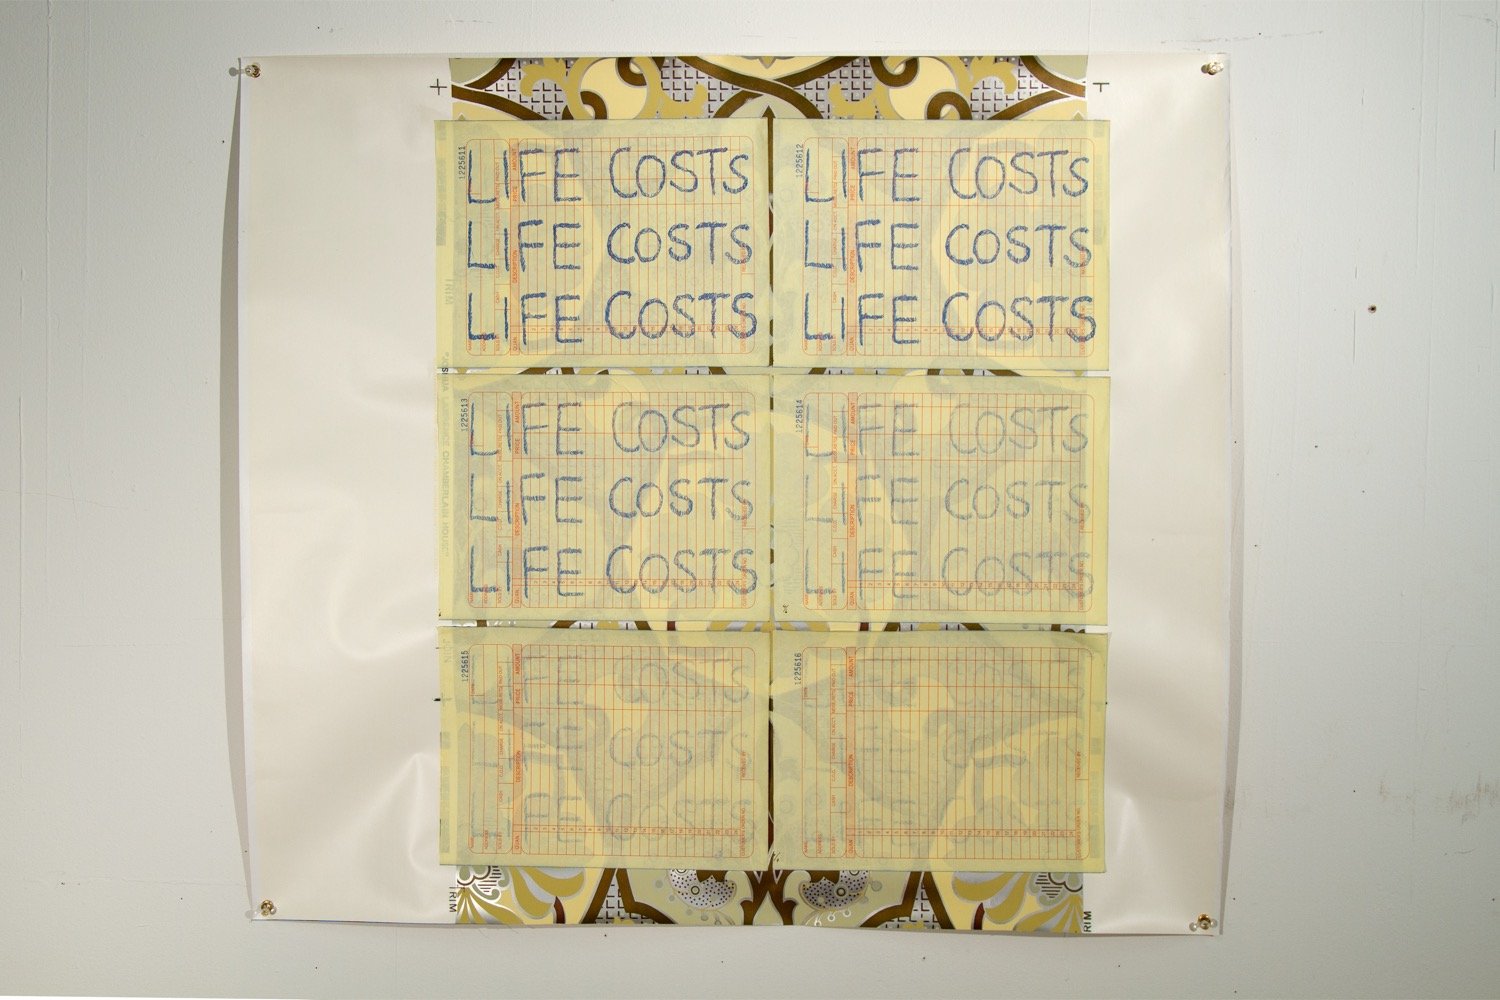   Life Costs ; Wall paper and copy paper, 2019, 32x33in 